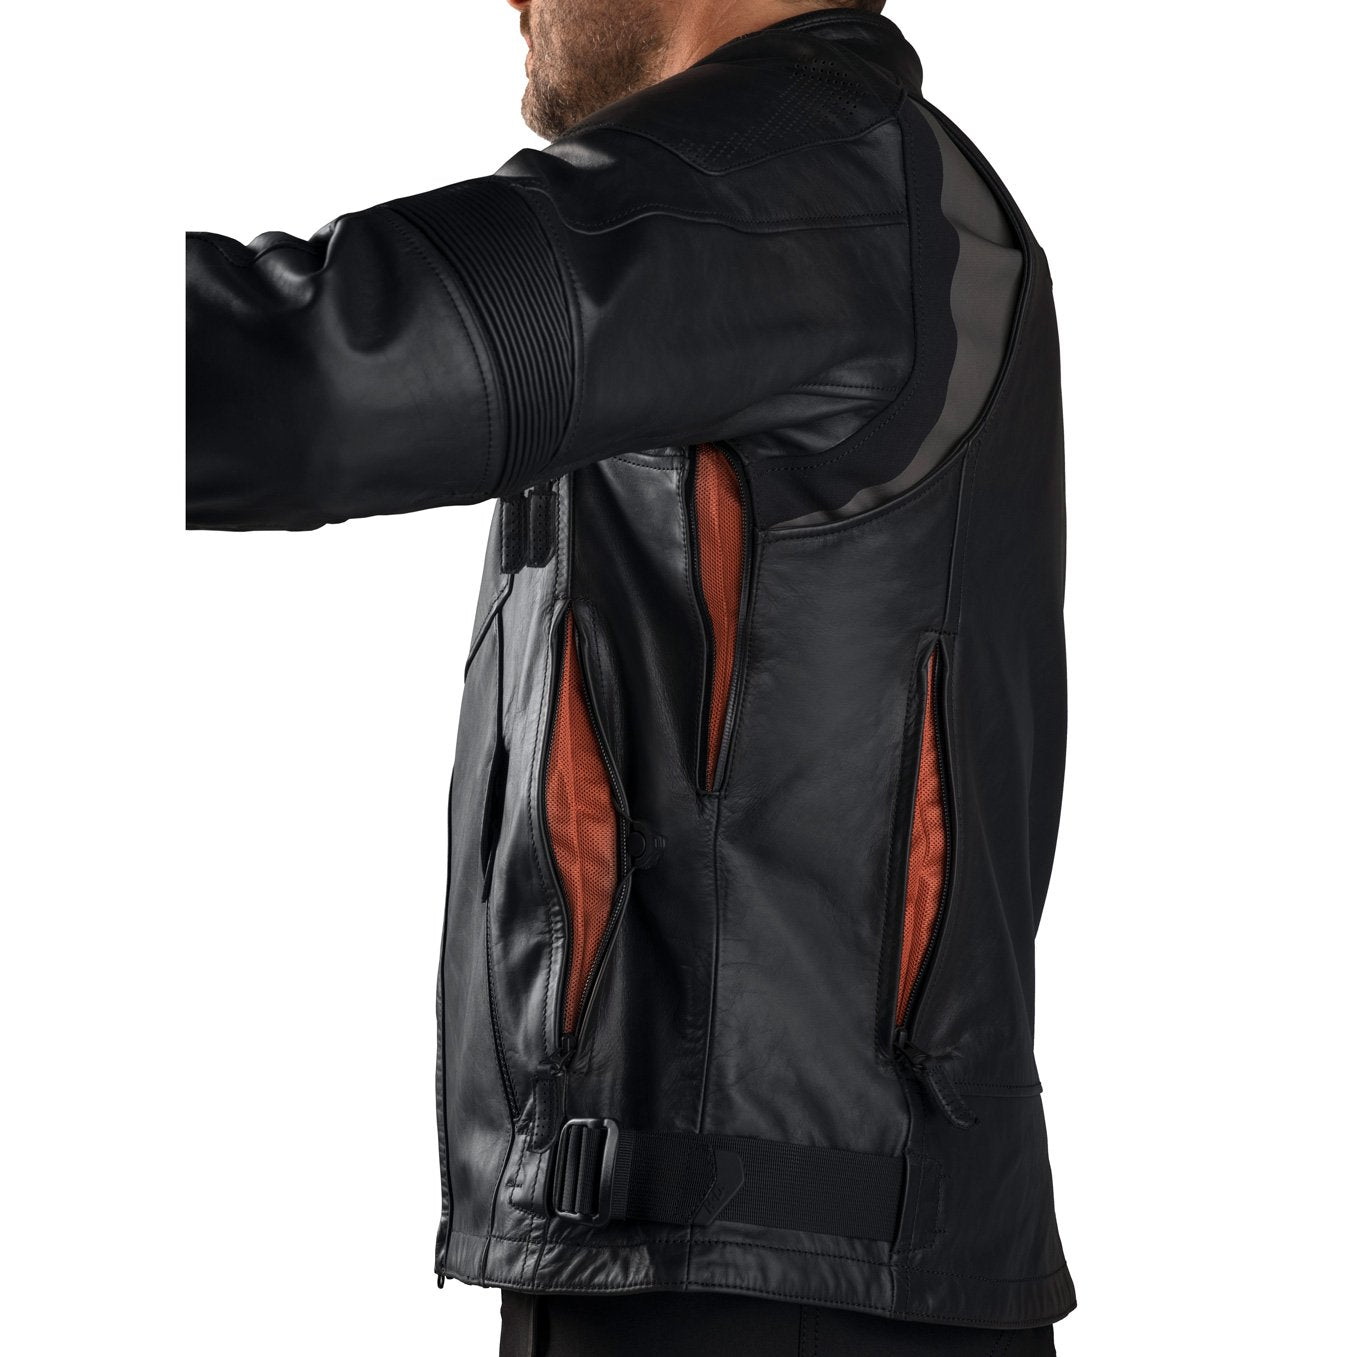 Harley Davidson FXRG Heavy weight motorhome, I mean leather jacket – East  Side Re-Rides